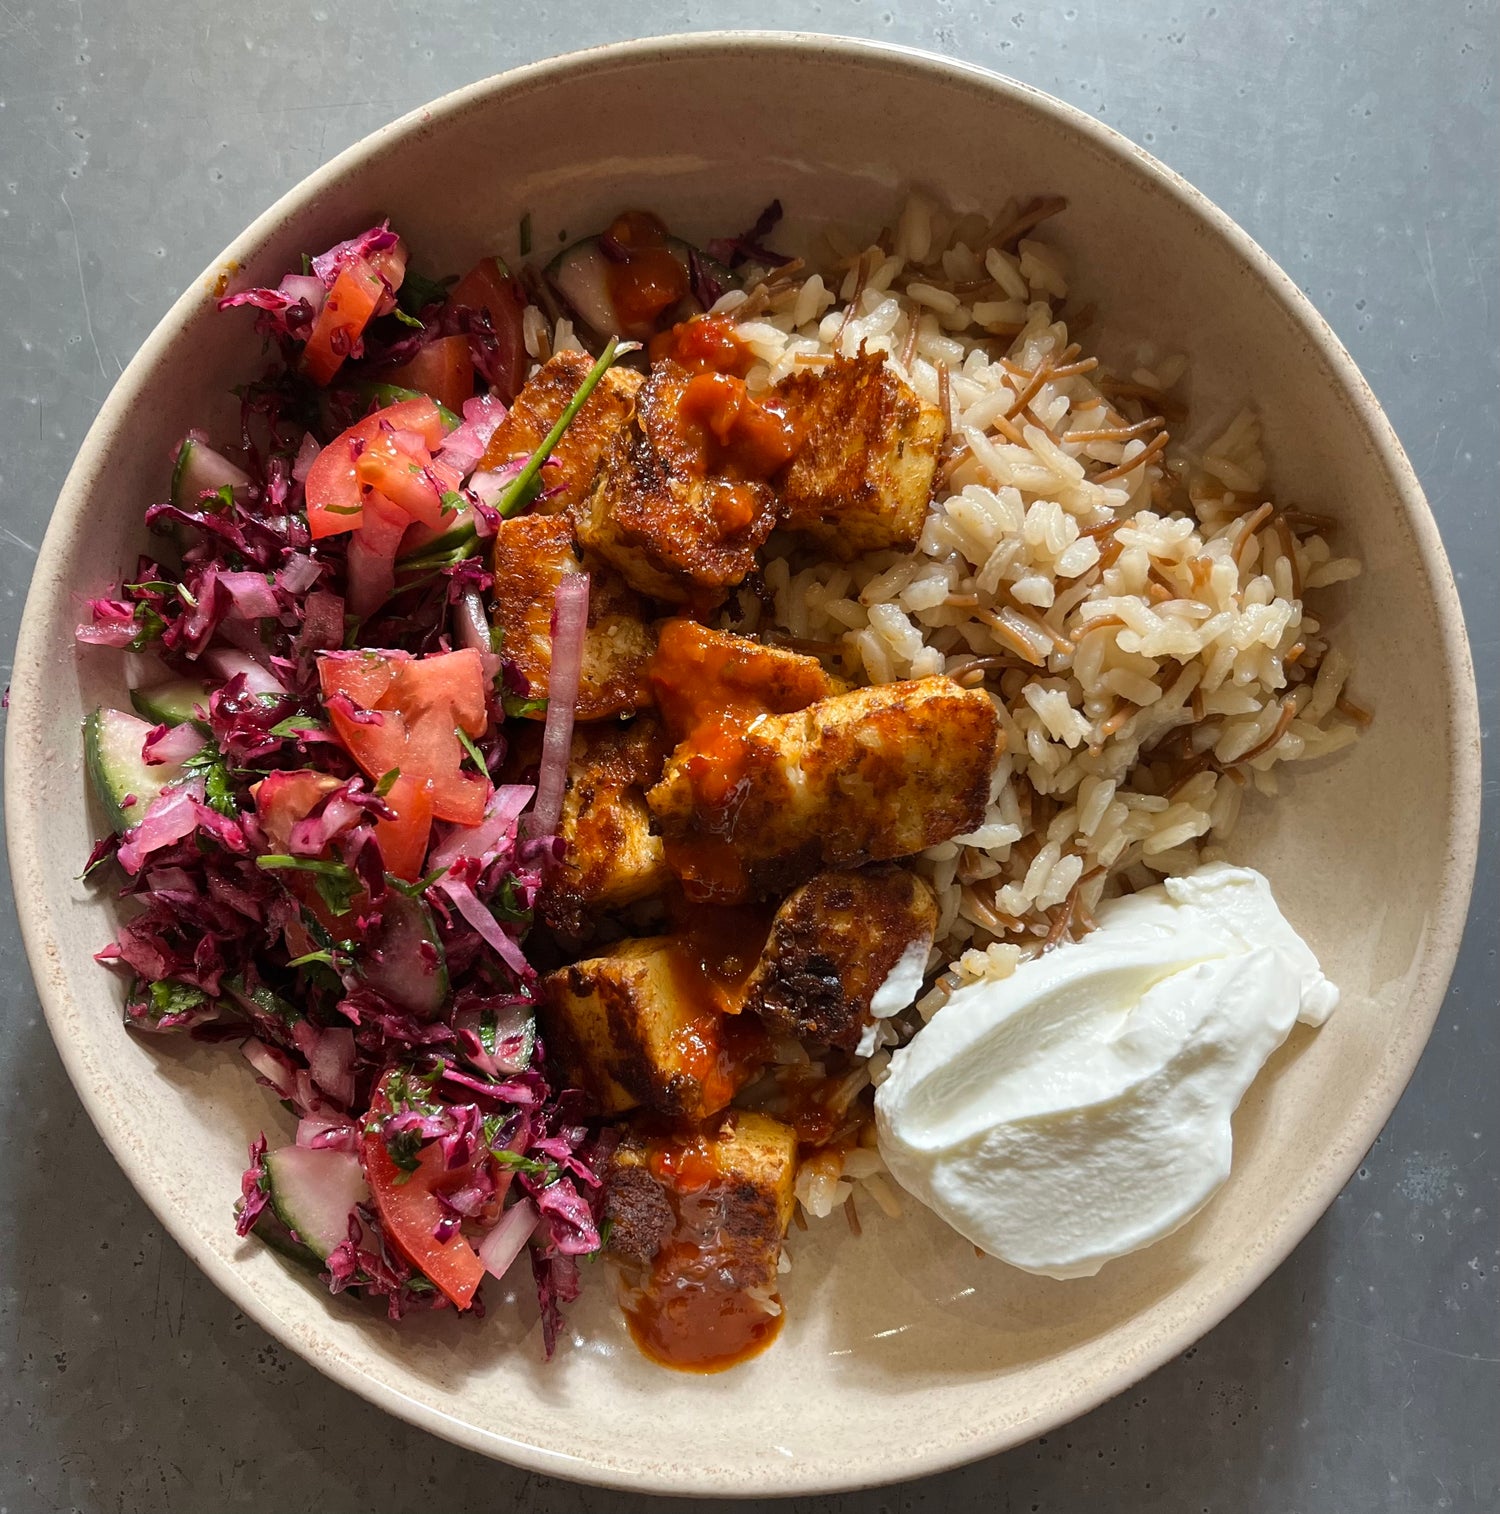 Halloumi Kebab with Fluffy Turkish Rice and Red Cabbage Salad